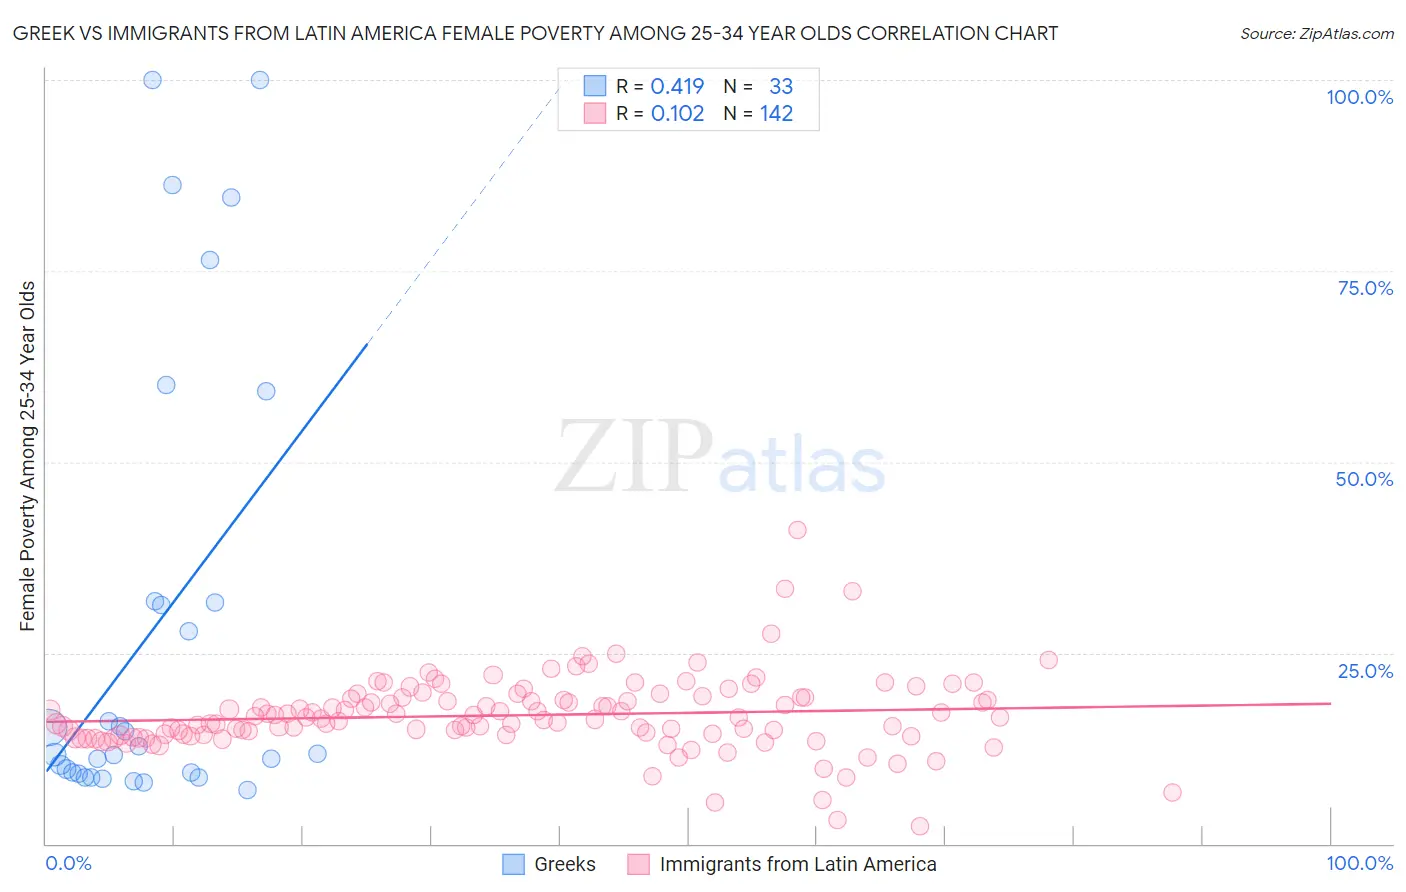 Greek vs Immigrants from Latin America Female Poverty Among 25-34 Year Olds